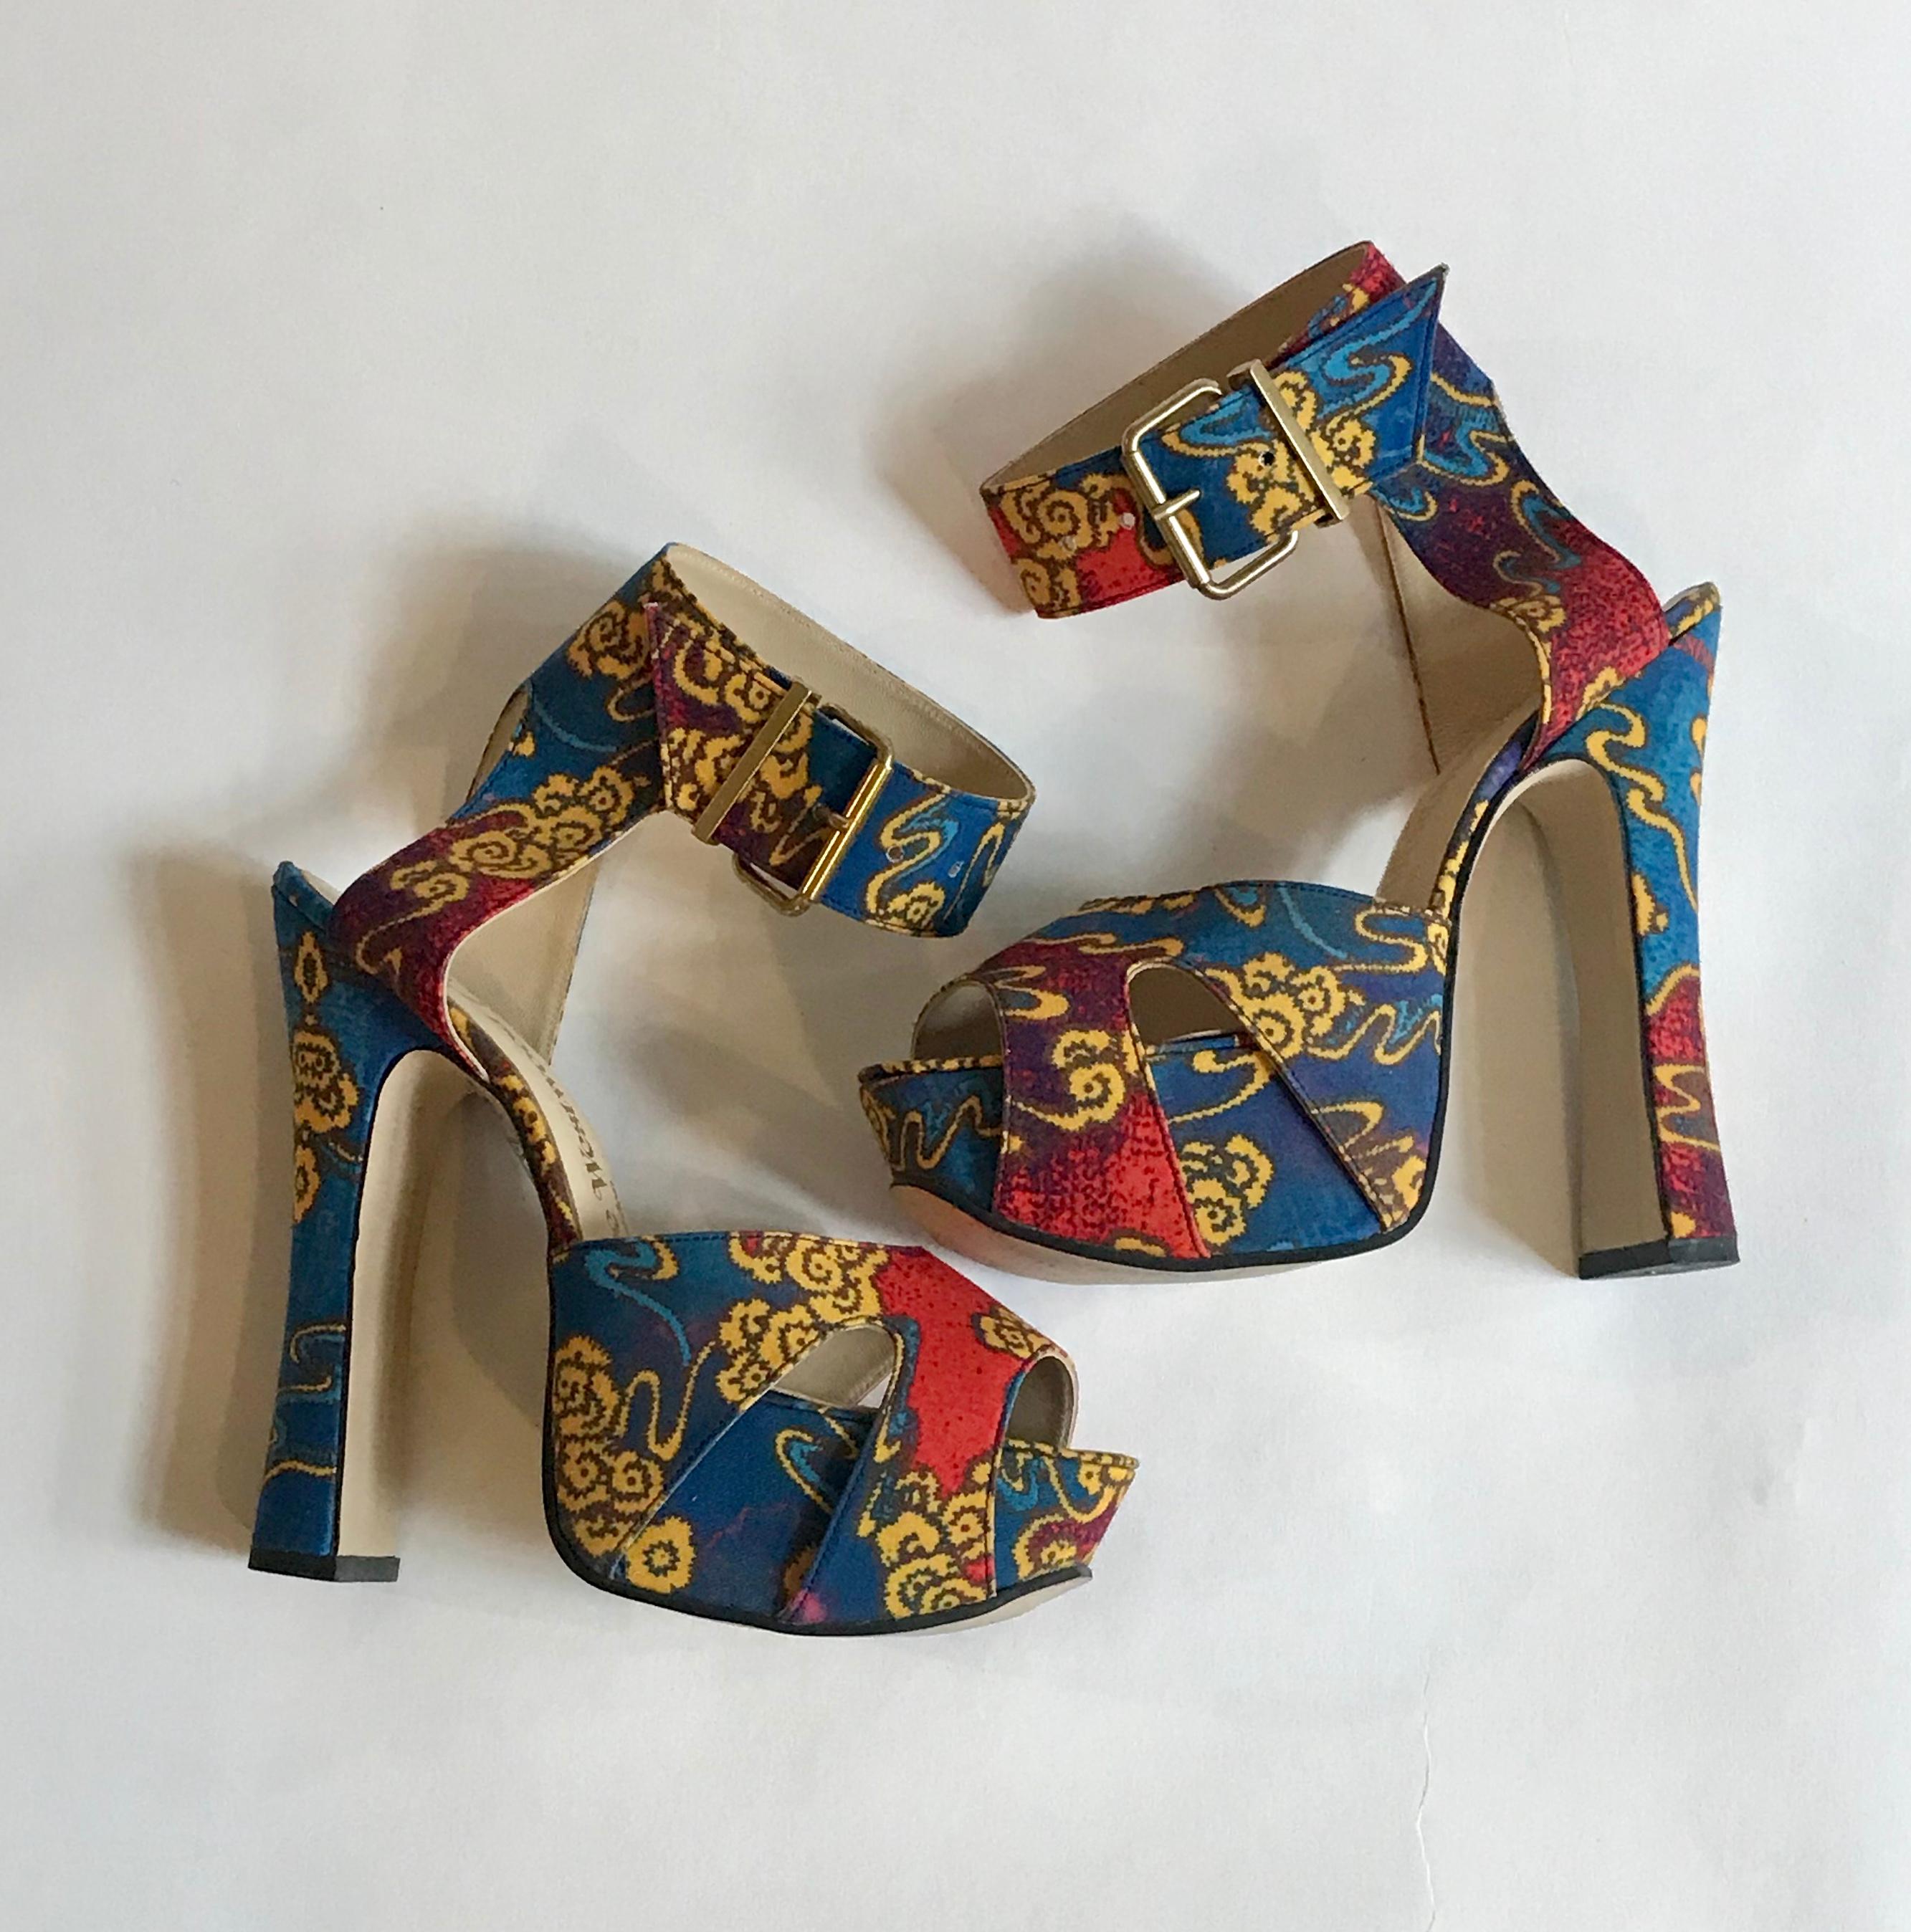 Rare Vivienne Westwood Elevated Slave style sandal in the designer's iconic blue, red, and gold Tea Garden print. Buckles at ankle strap. Chunky heel with an elegant curve measures 6 3/4